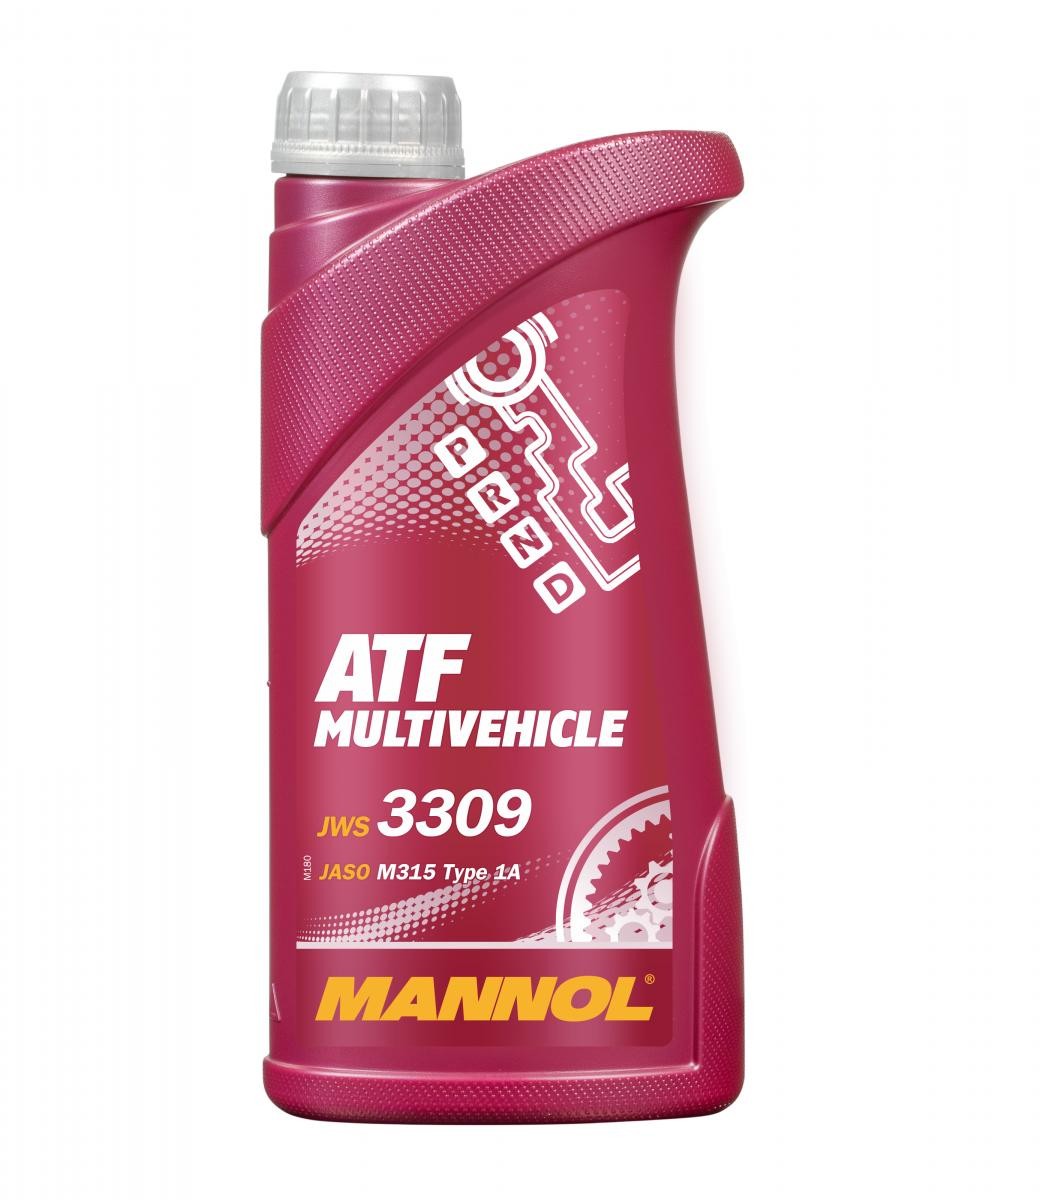 MANNOL ATF Multivehicle ATF III, 1l Automatic transmission oil MN8210-1 buy